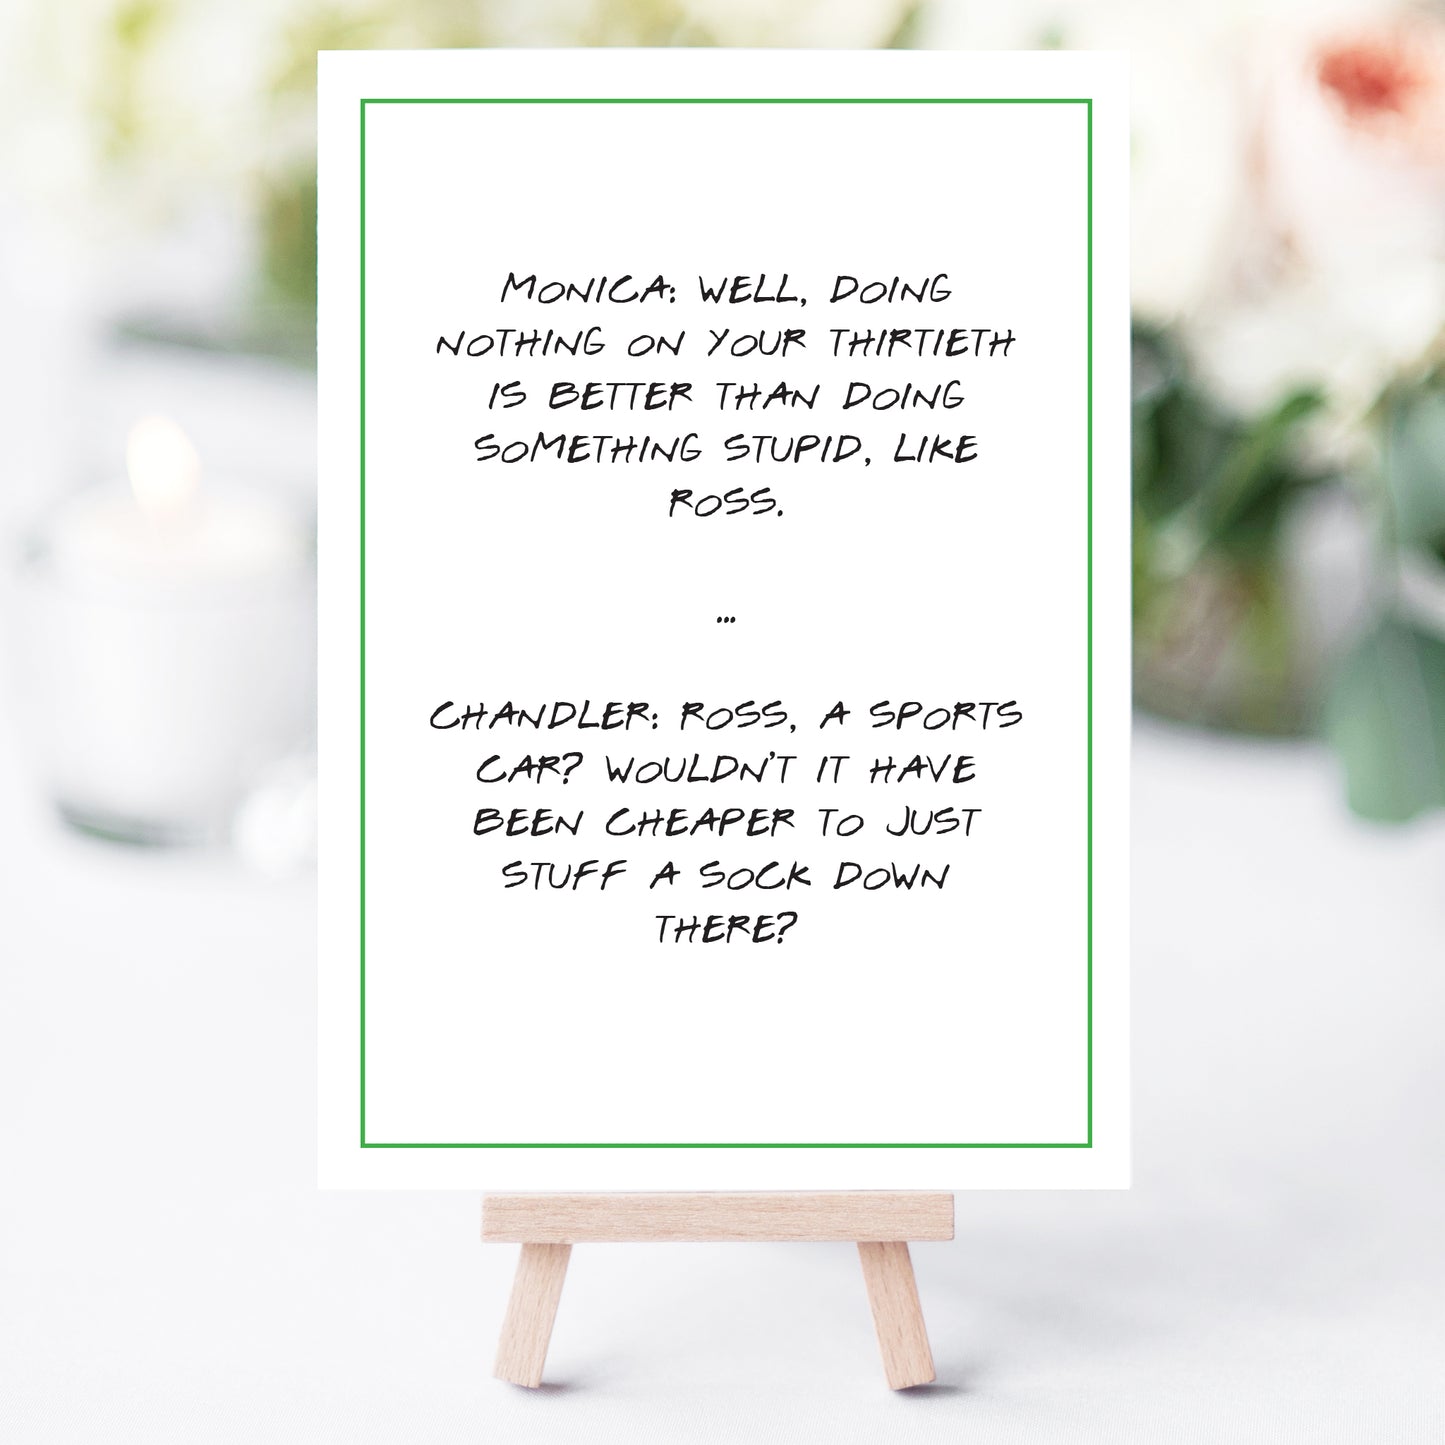 Friends Birthday Party Quotes Printables